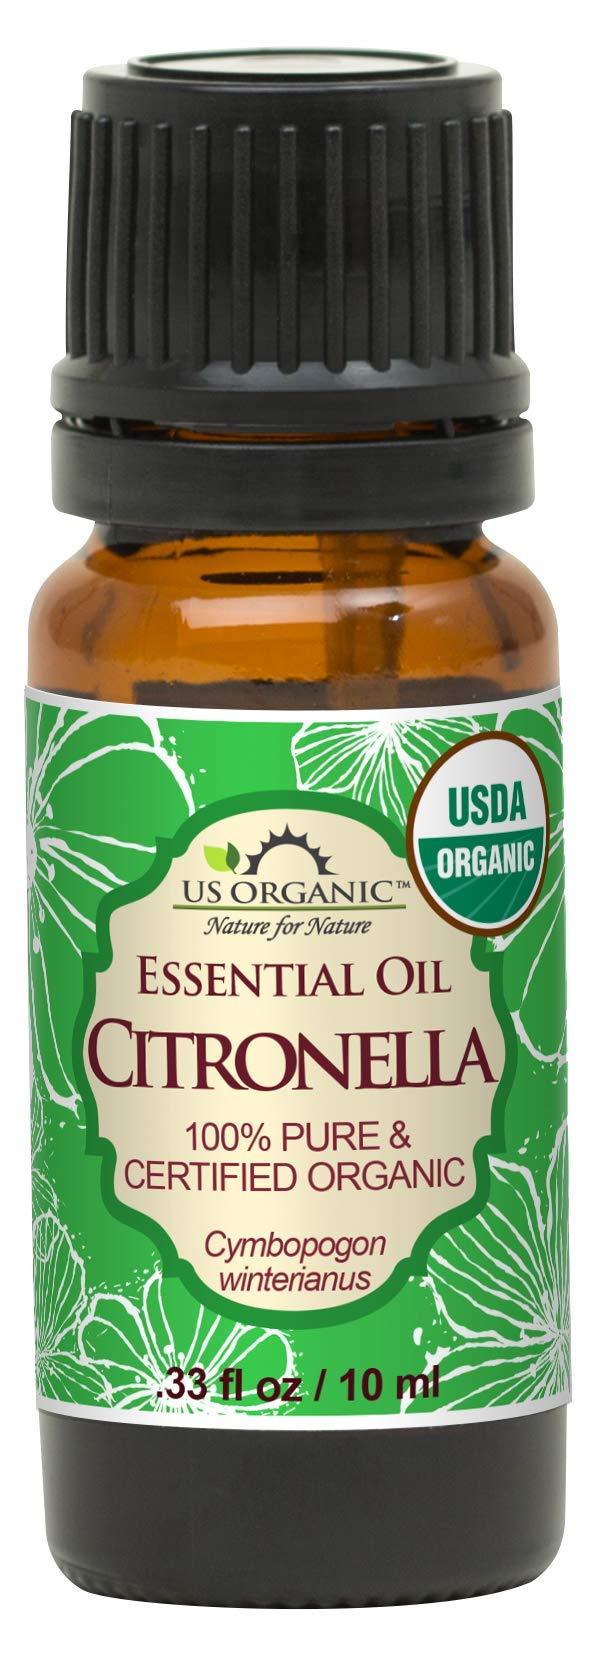 US Organic Citronella Essential Oil, Certified Organic, Pure & Natural, Improved caps and droppers. Used for Skin Care, DIY Projects Like Candle Making and Much More (10 ml, .33 fl oz) 0.33 Fl Oz (Pack of 1) - BeesActive Australia